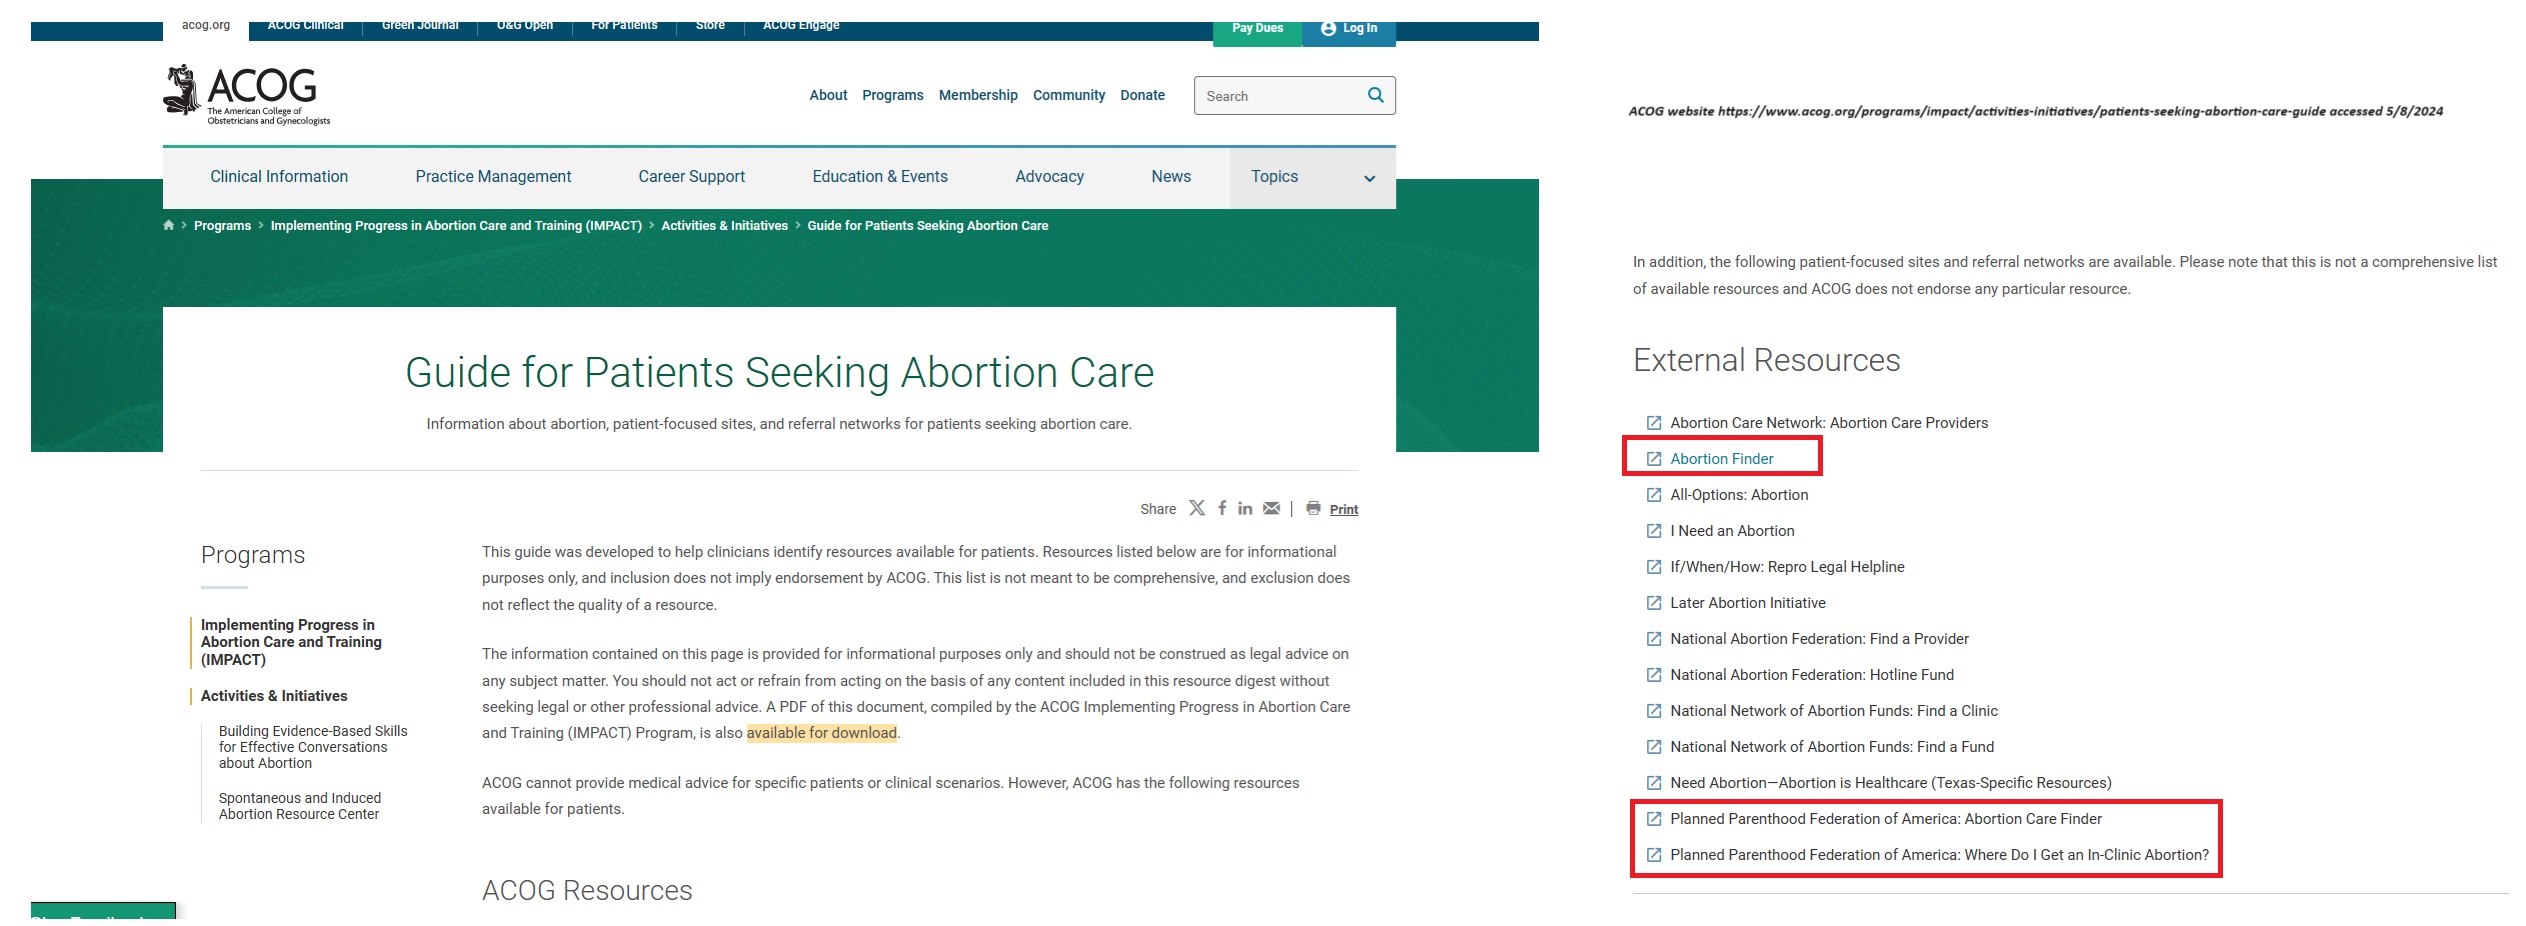 ACOG website refers for abortion promotes Planned Parenthood accessed 050824